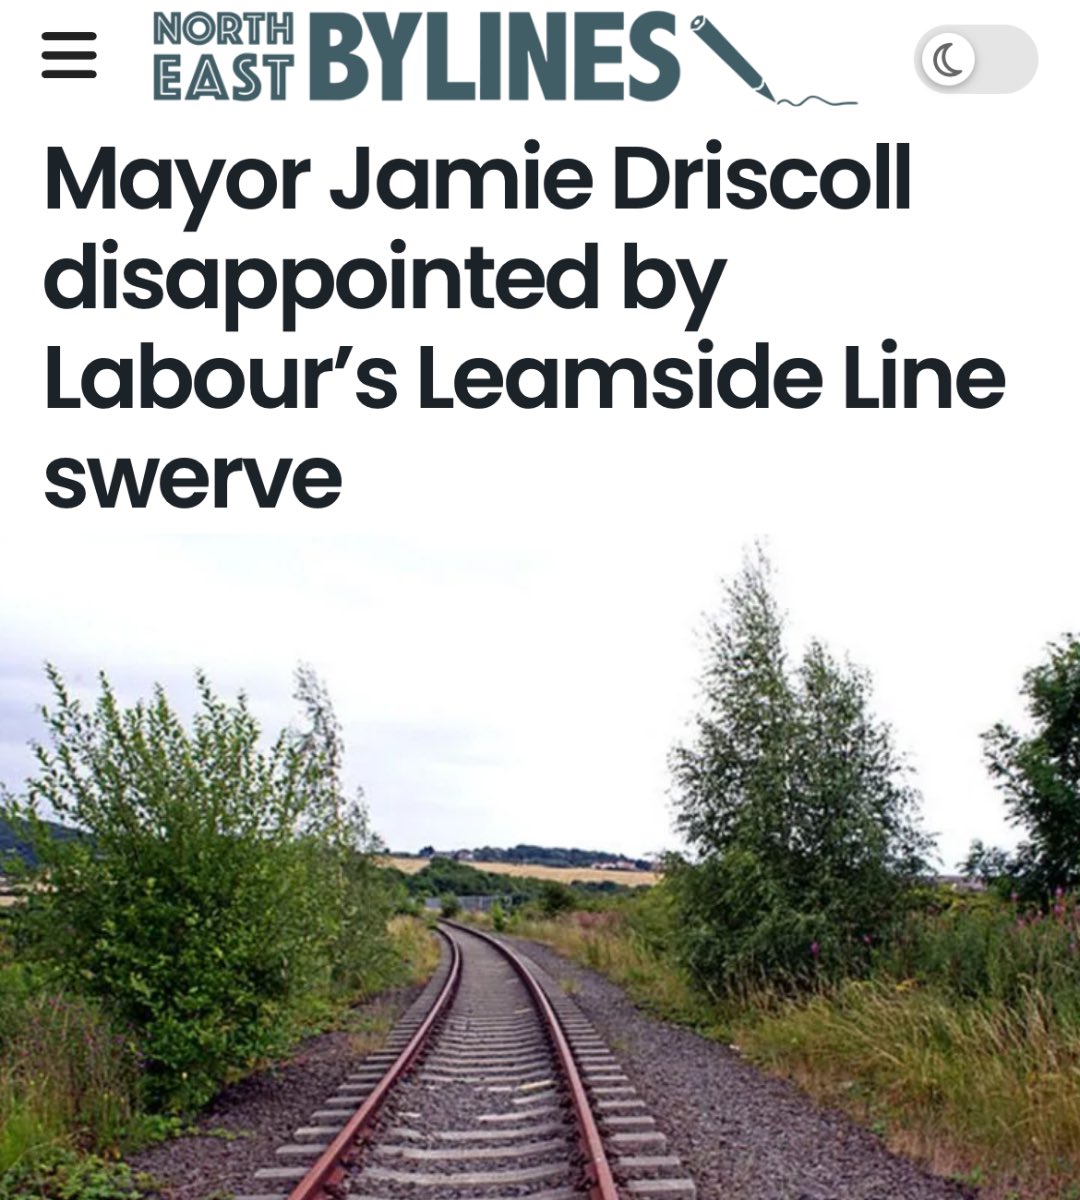 It appears that Labour’s promise to open the Leamside Line has gone ‘off the rails’. Ignoring regional politicians of all parties. There is broad support for reopening this key rail route. What we need is a mayor that is adept at negotiating with government, whatever colour it